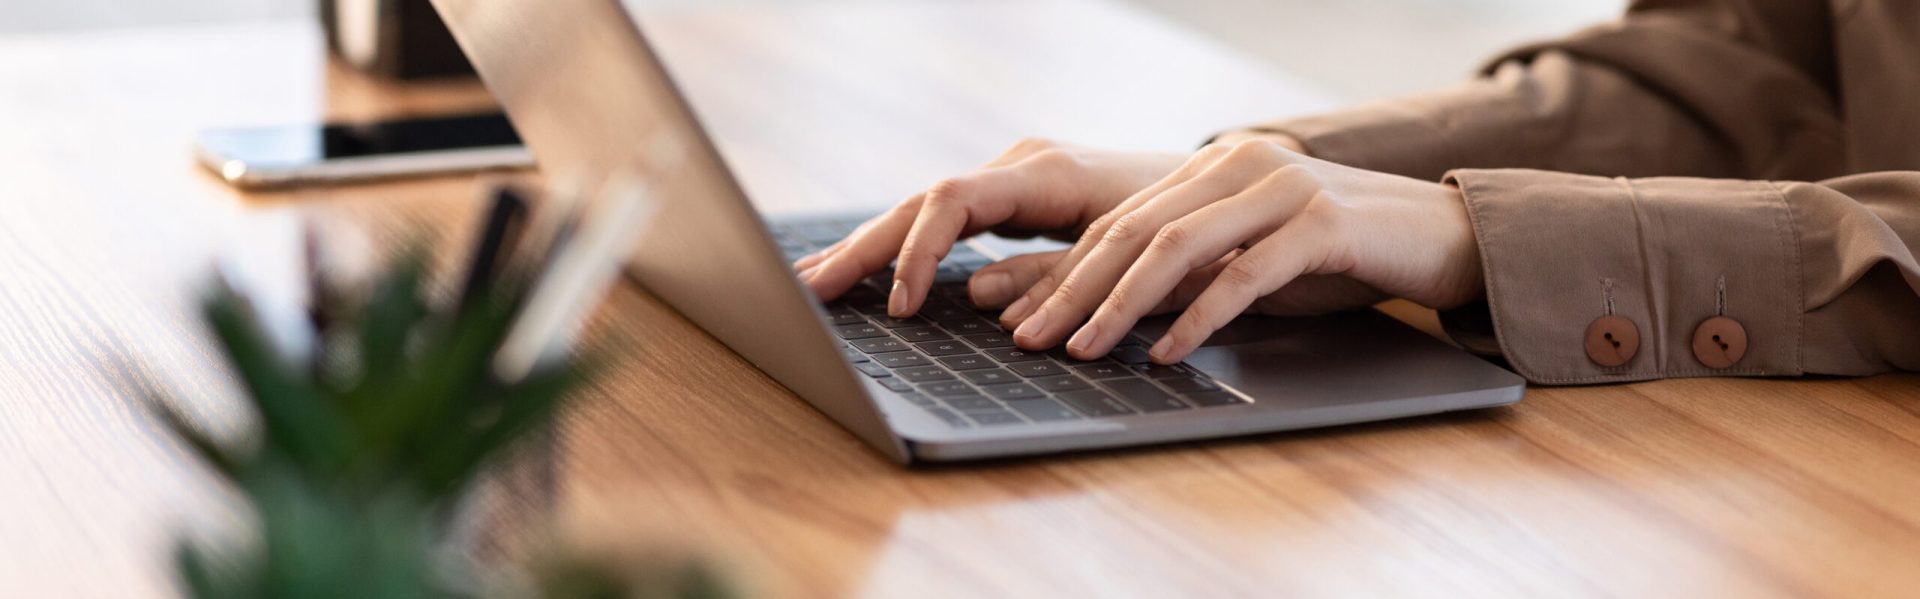 Information Searching. European girl using laptop, close up of female hands, free space